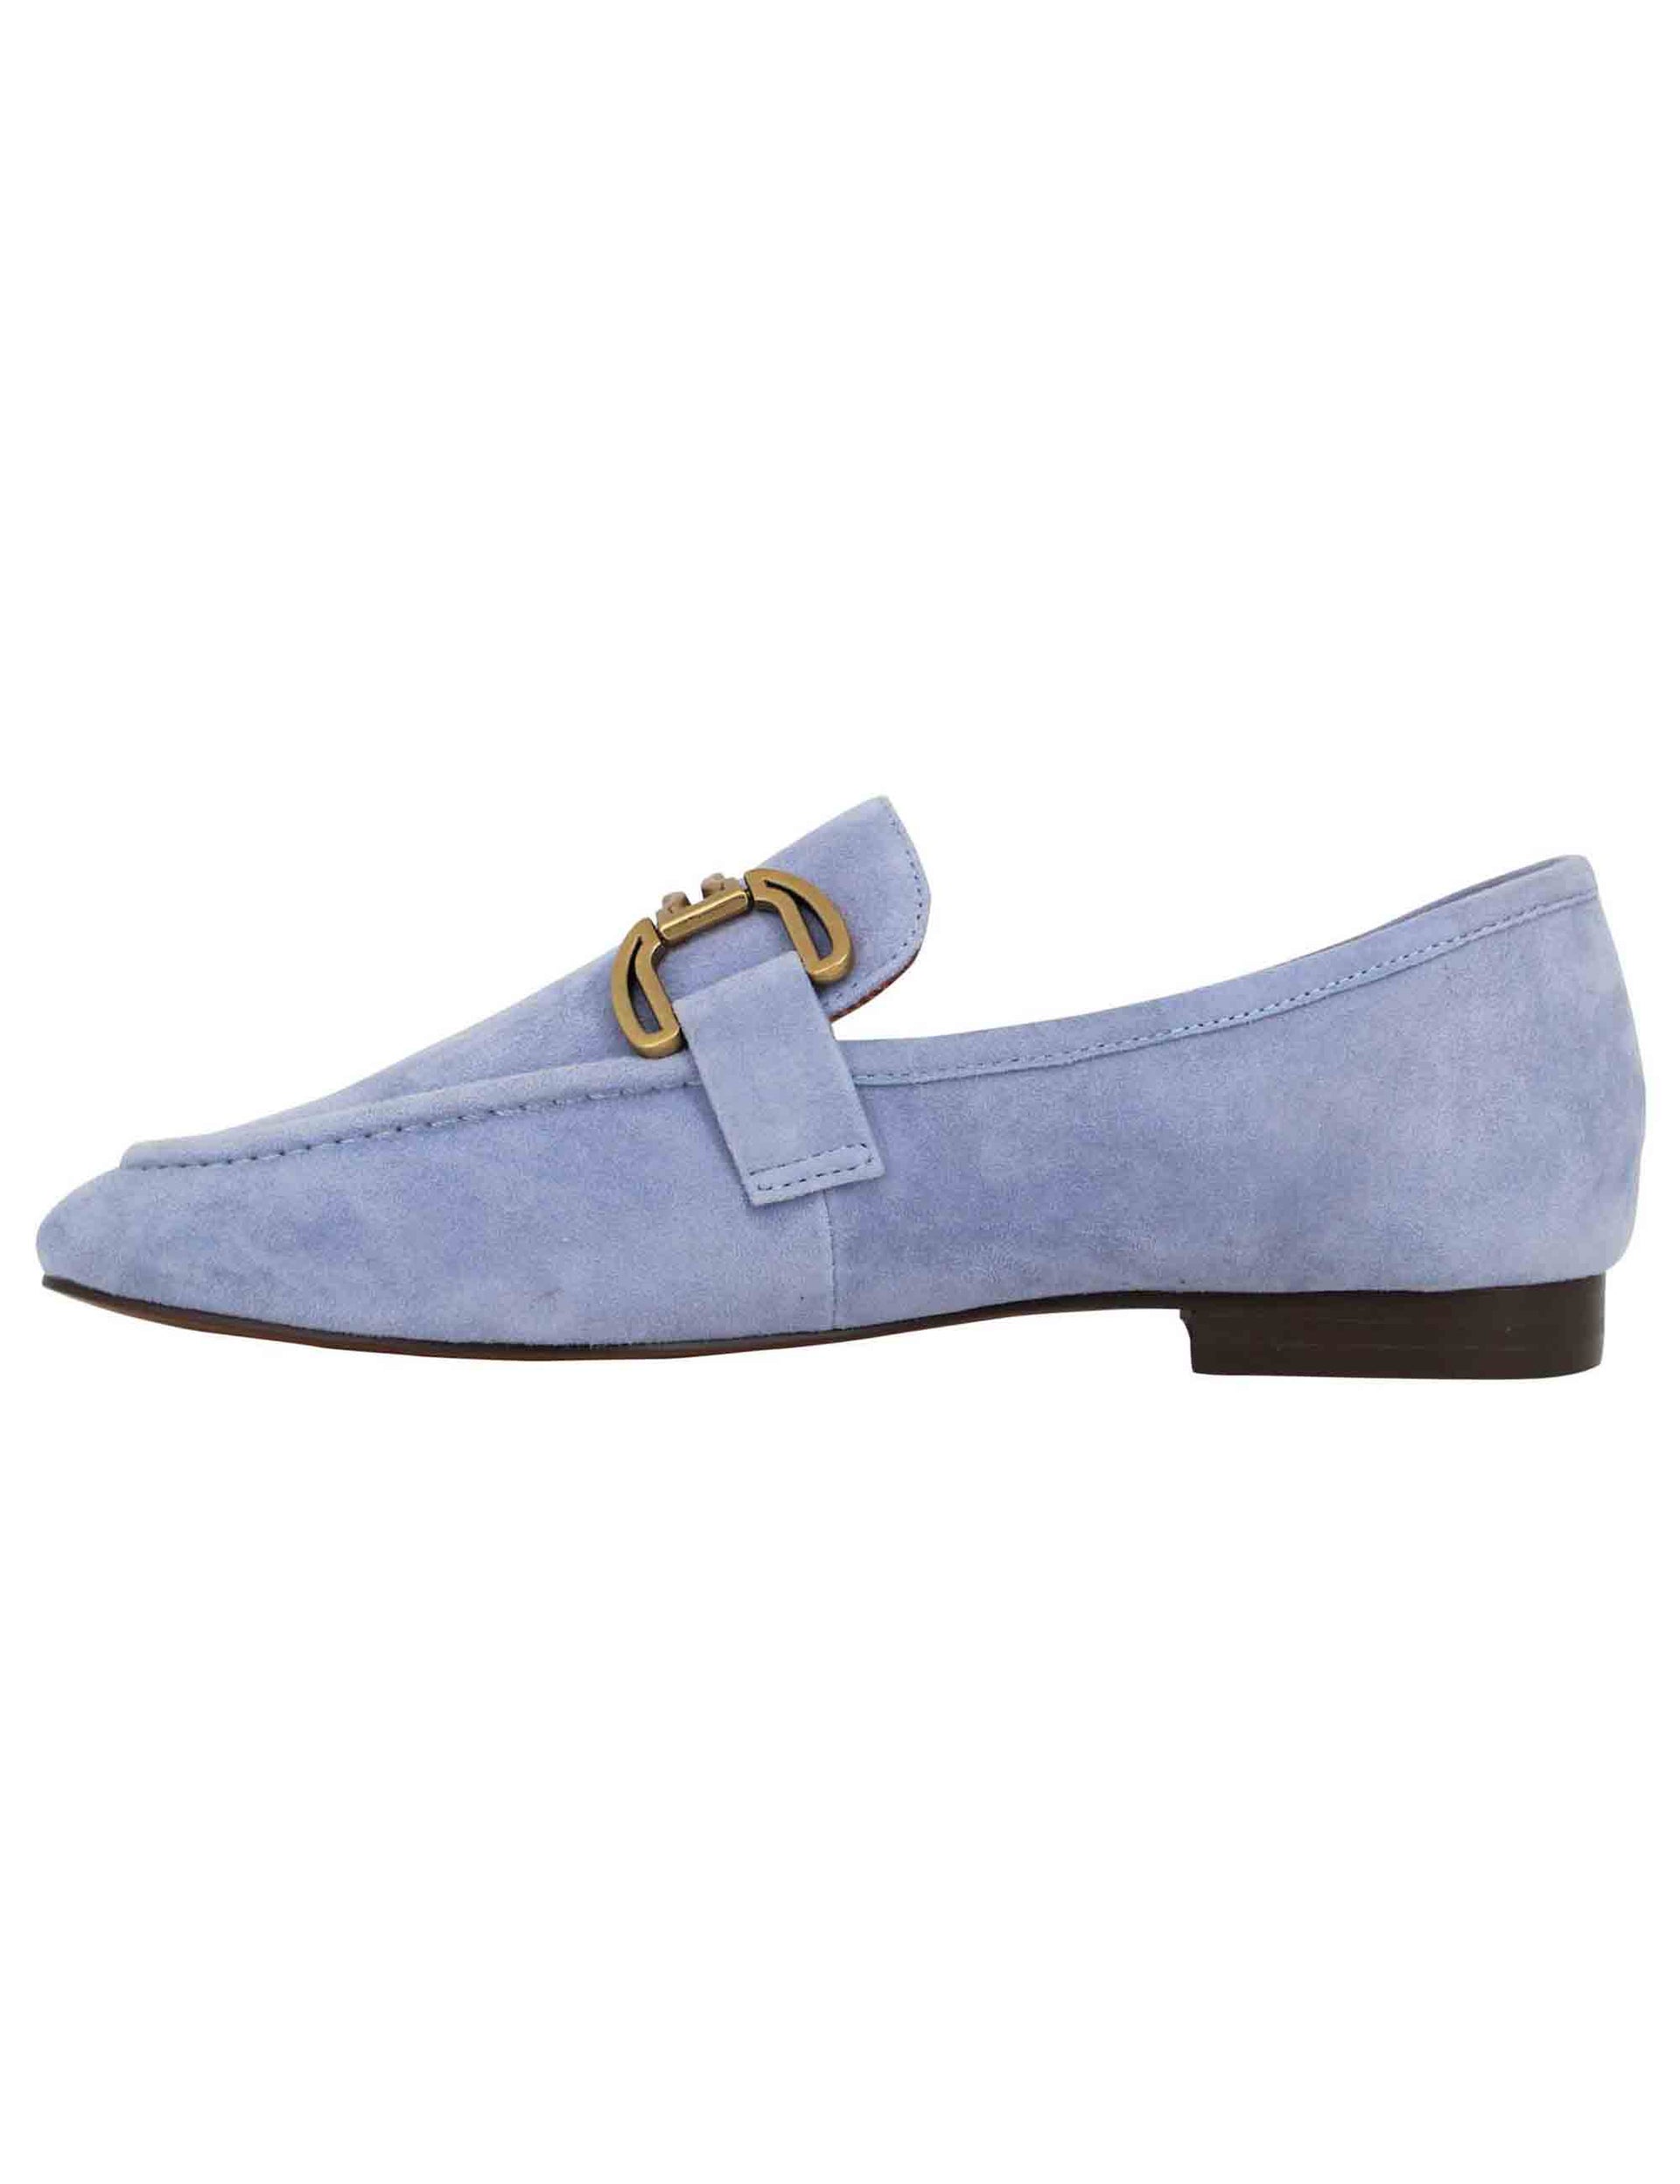 Women's moccasins in light blue suede with moccasin and low heel Zagreb